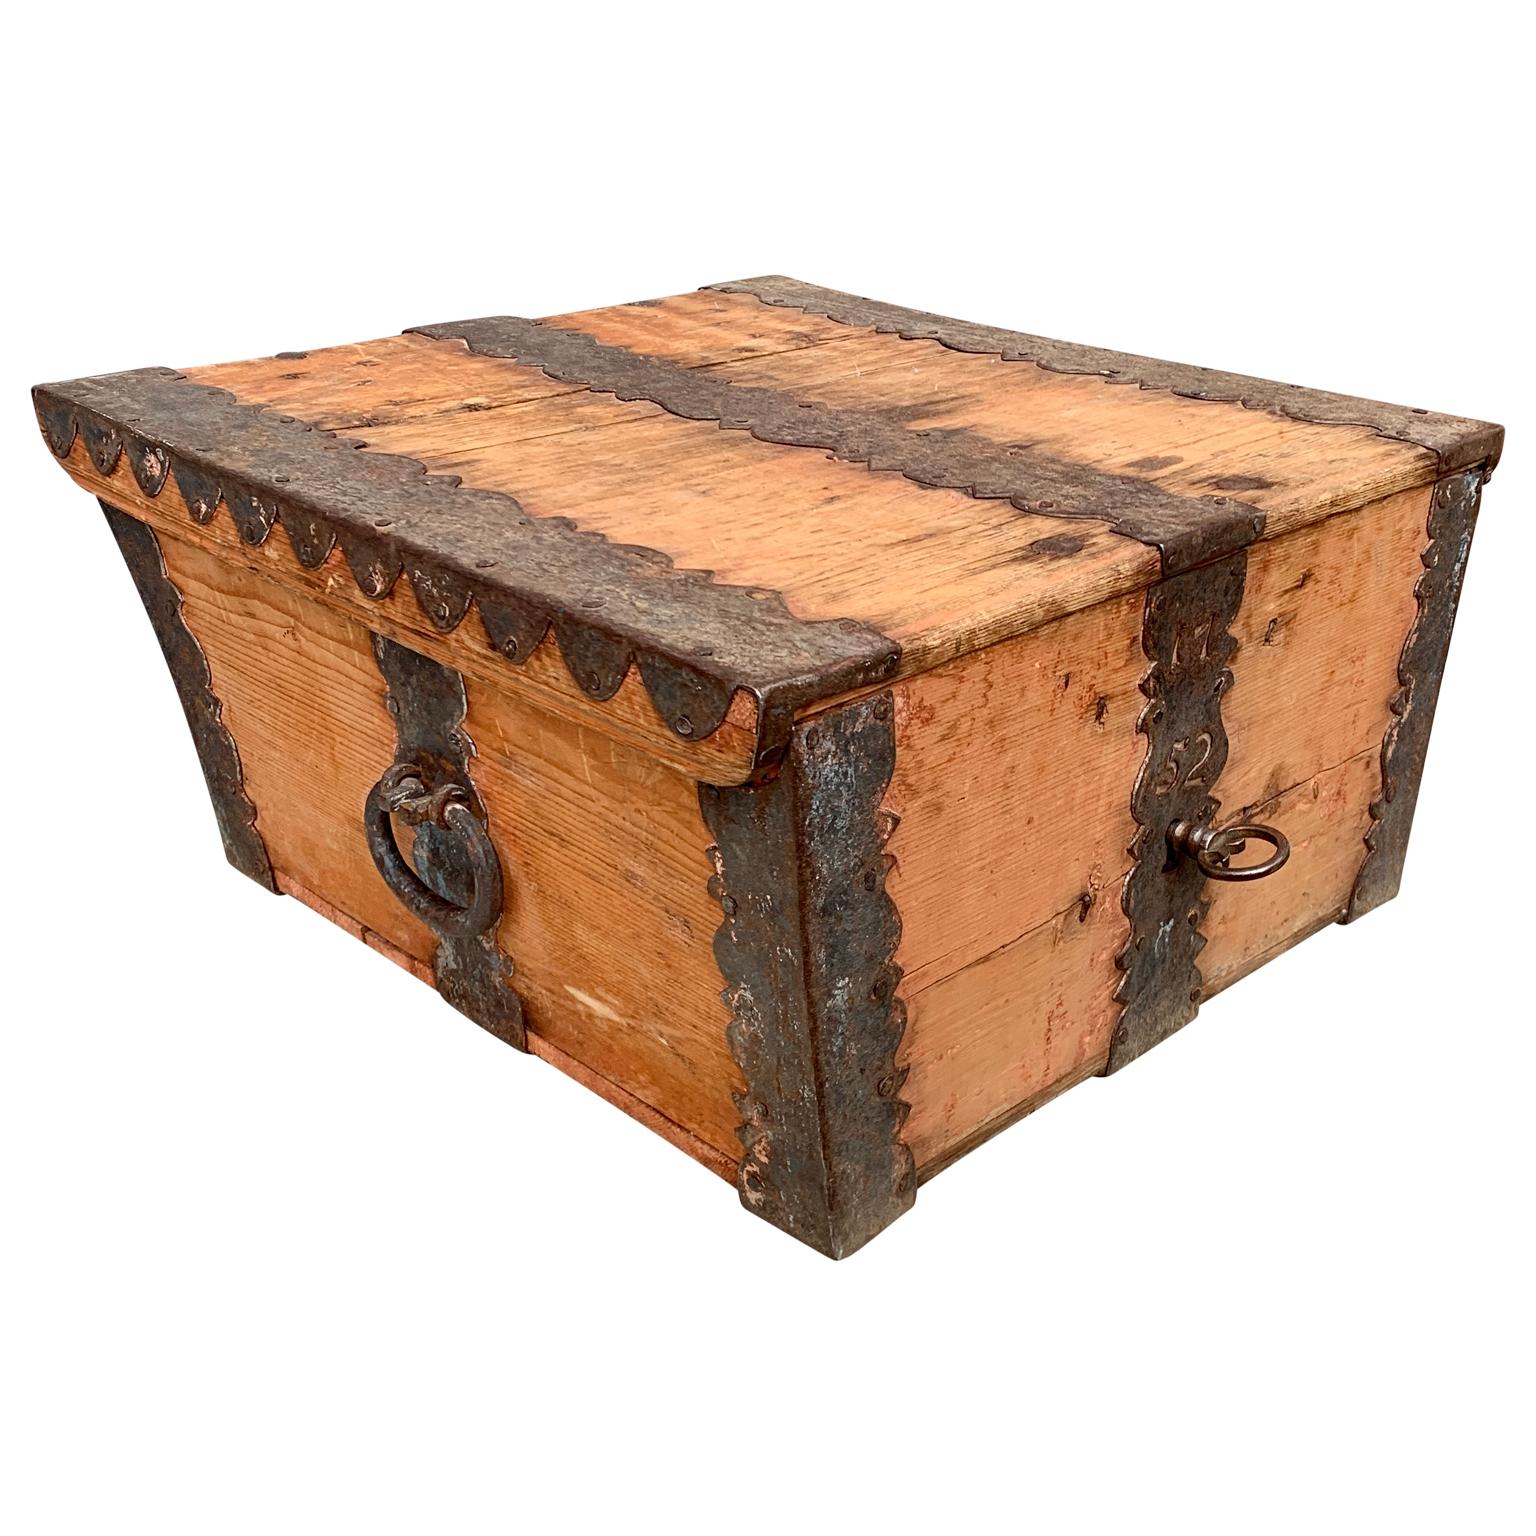 Hand-Crafted Scandinavian 18th Century Wooden Box, Dated 1752 For Sale